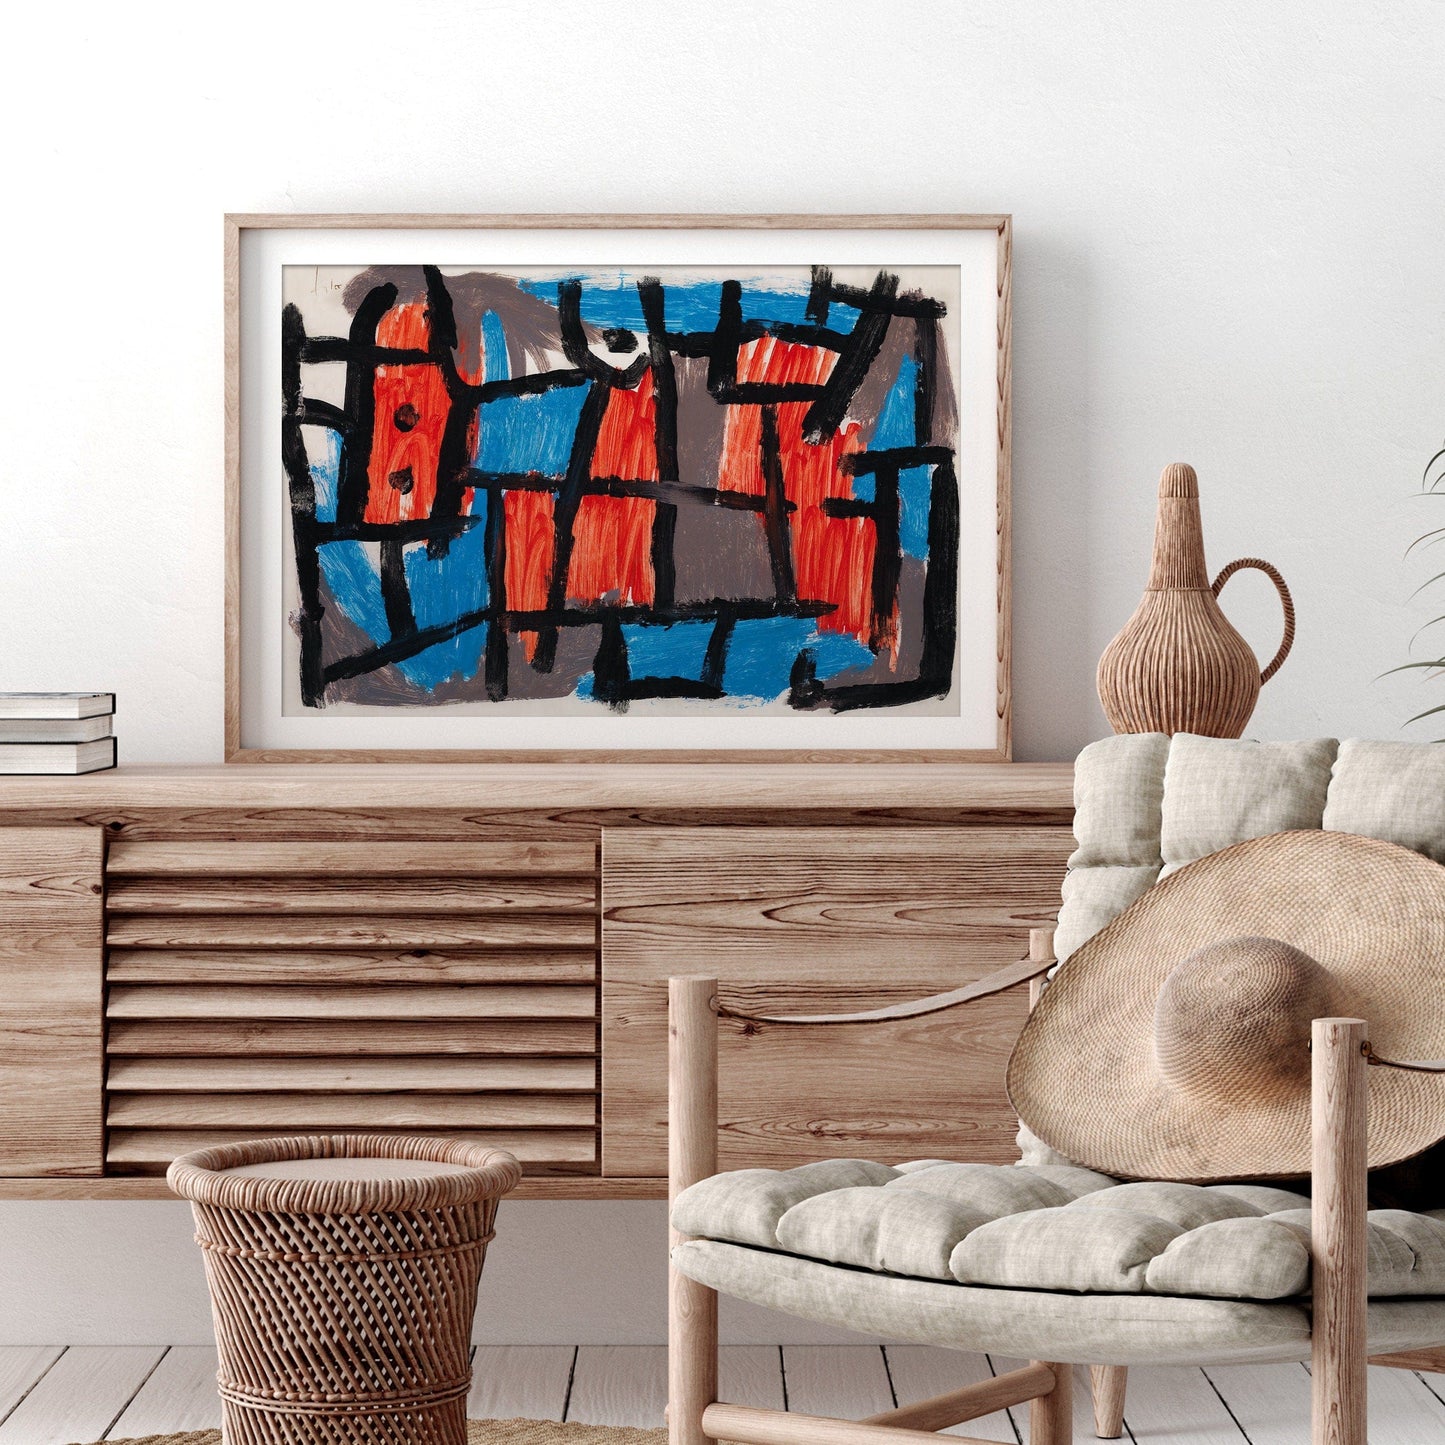 Home Poster Decor Single Paul Klee Wall Art, Bauhaus poster, Abstract Print, Modern Gallery, Paul Klee Print, The Our Before One Night, Interior Design